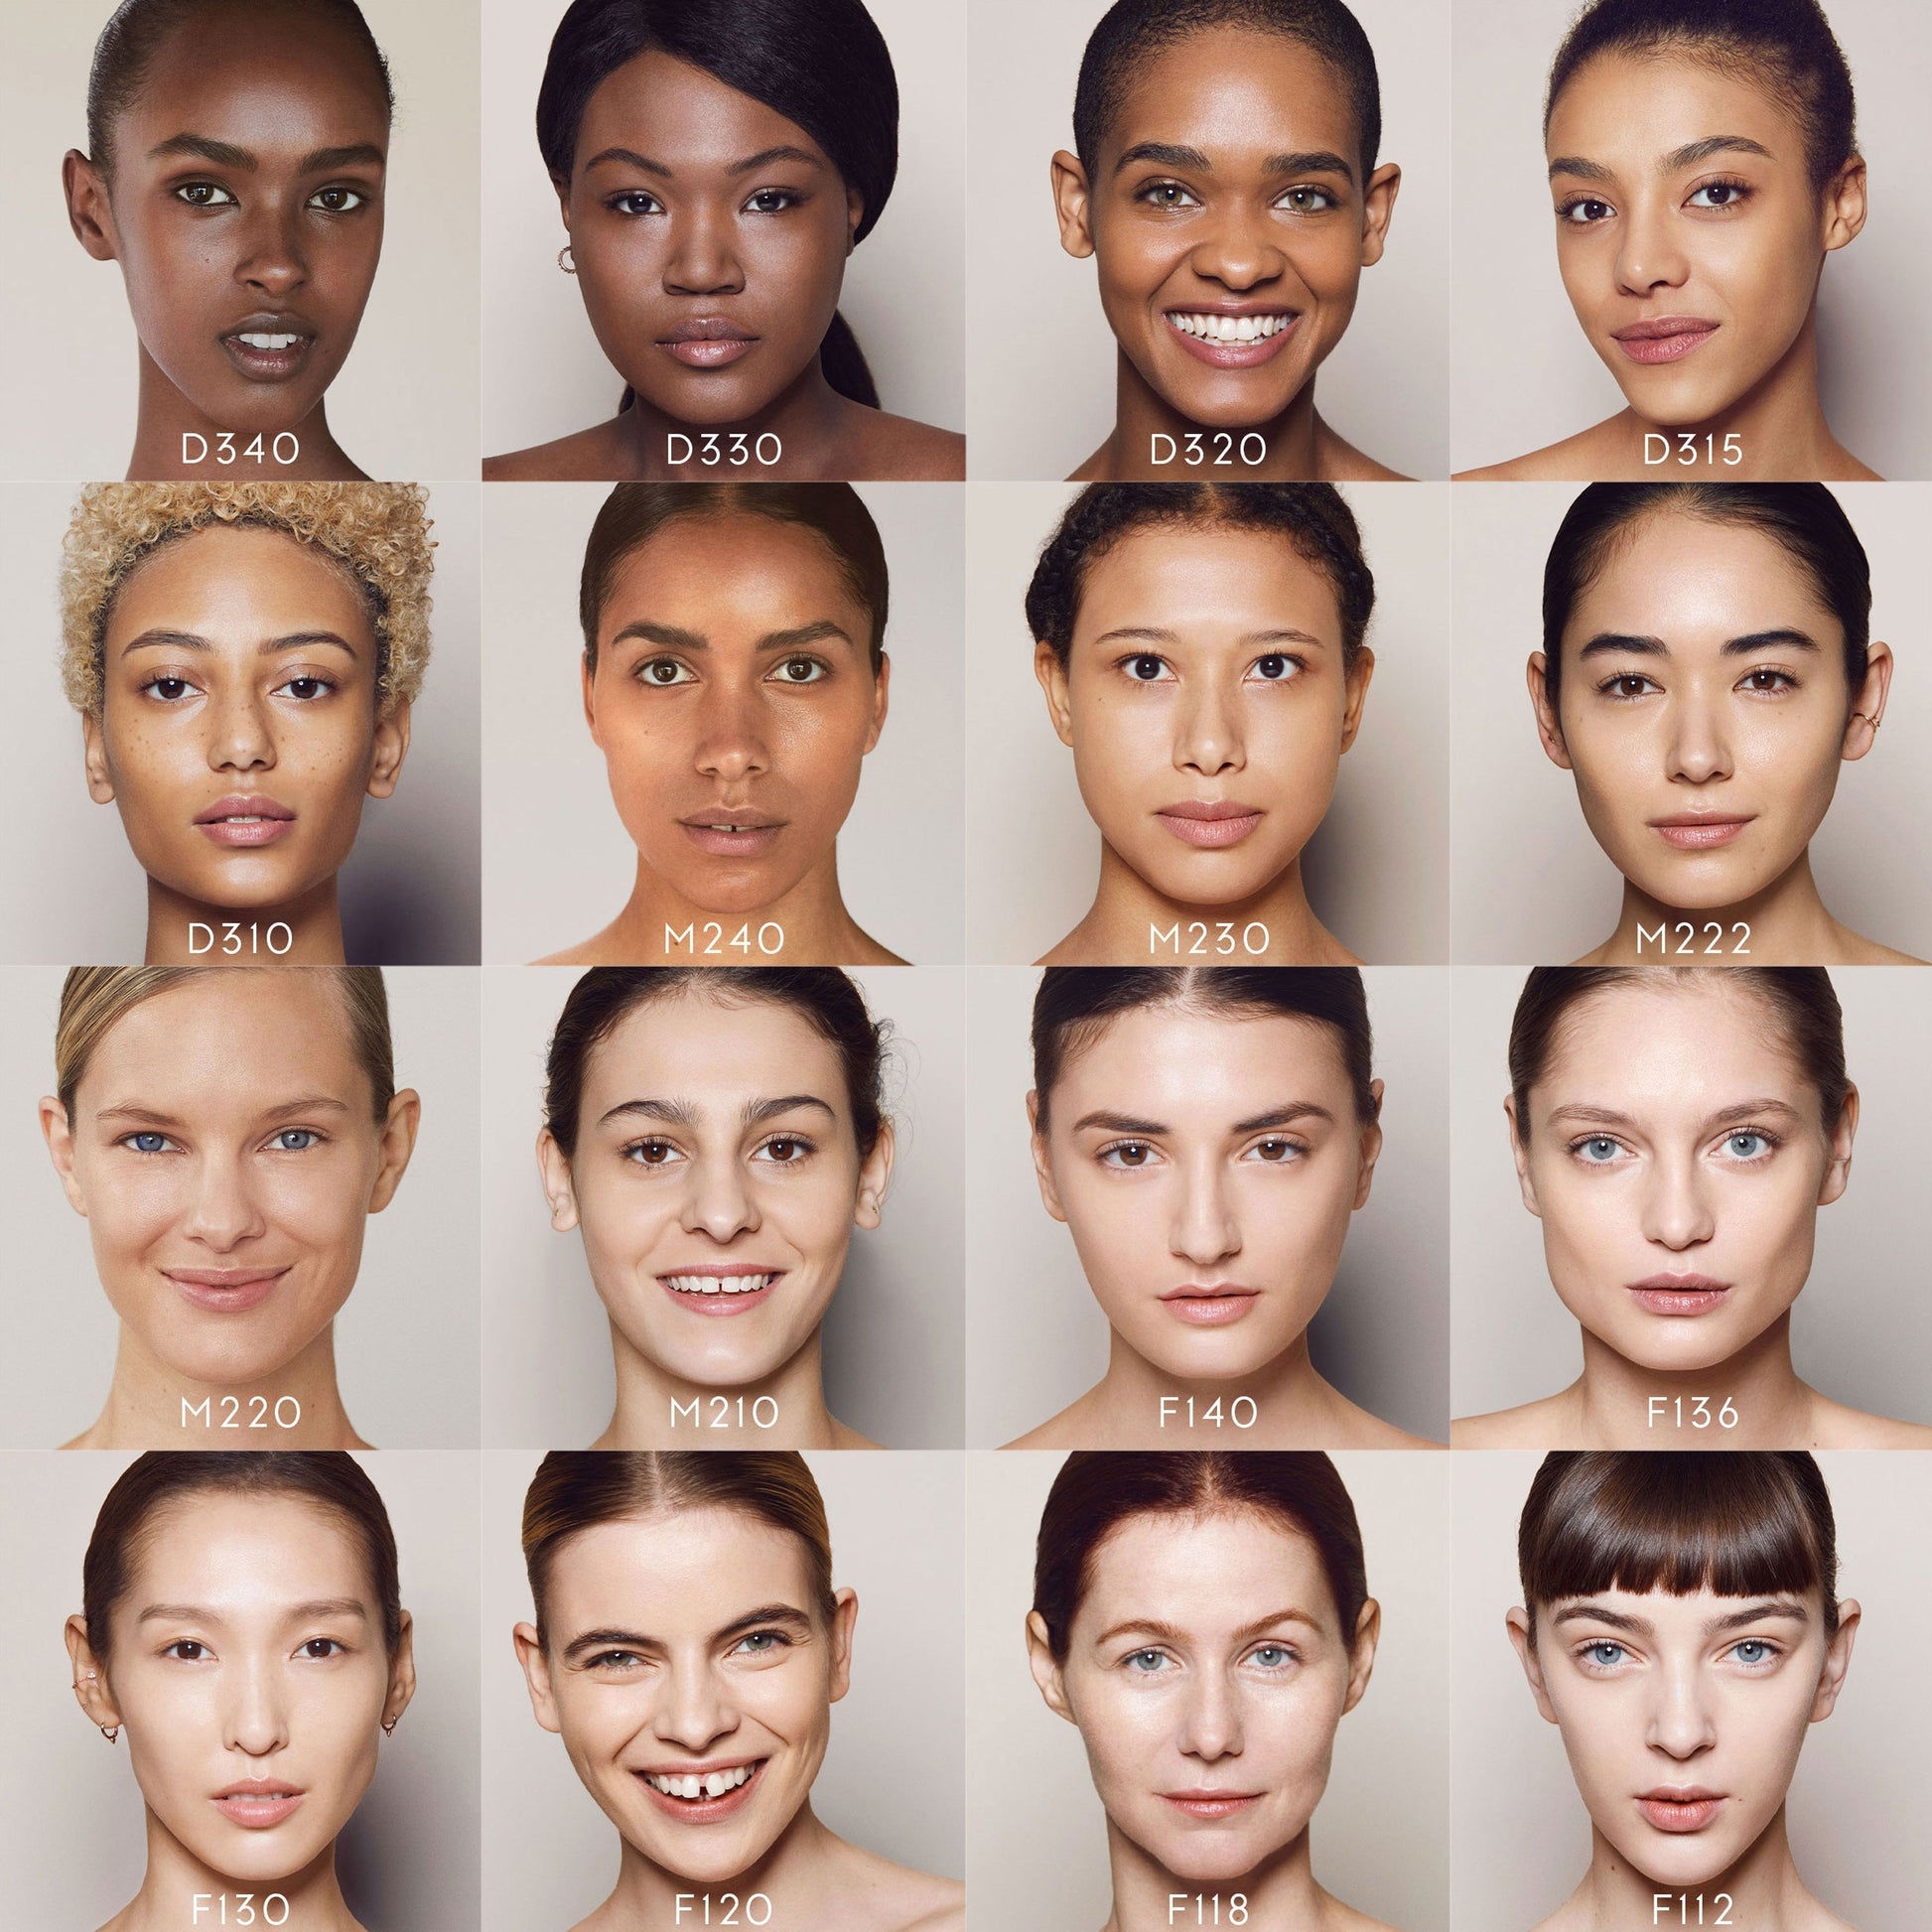 Close ups of various faces of different skin tones, from dark to light with the foundation shades they are wearing. M232 is the seventh-darkest shade shown. 